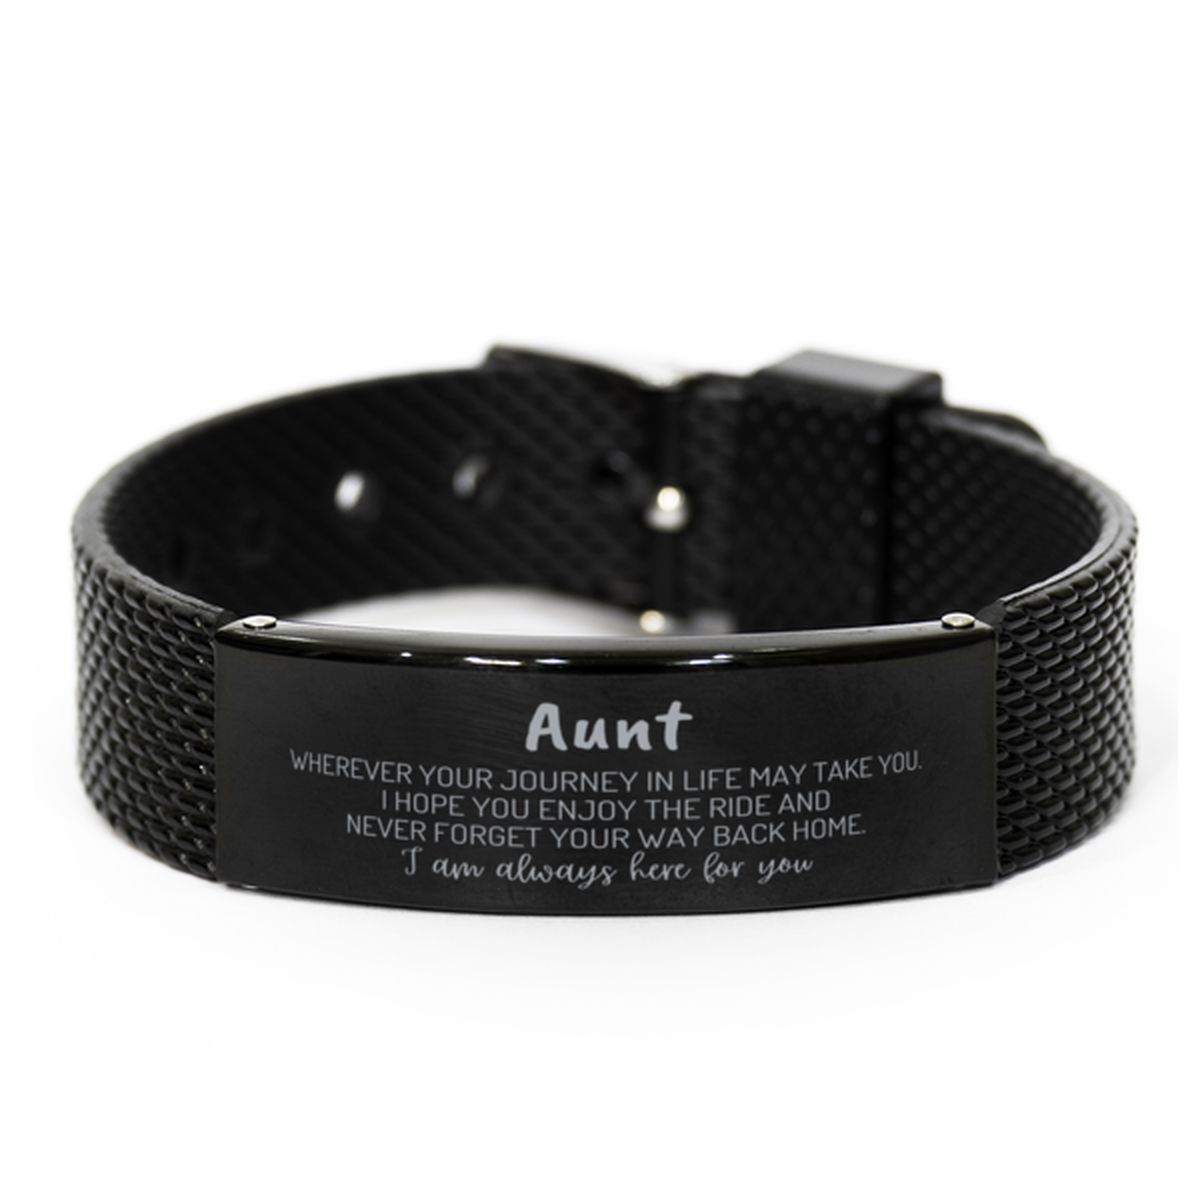 Aunt wherever your journey in life may take you, I am always here for you Aunt Black Shark Mesh Bracelet, Awesome Christmas Gifts For Aunt, Aunt Birthday Gifts for Men Women Family Loved One